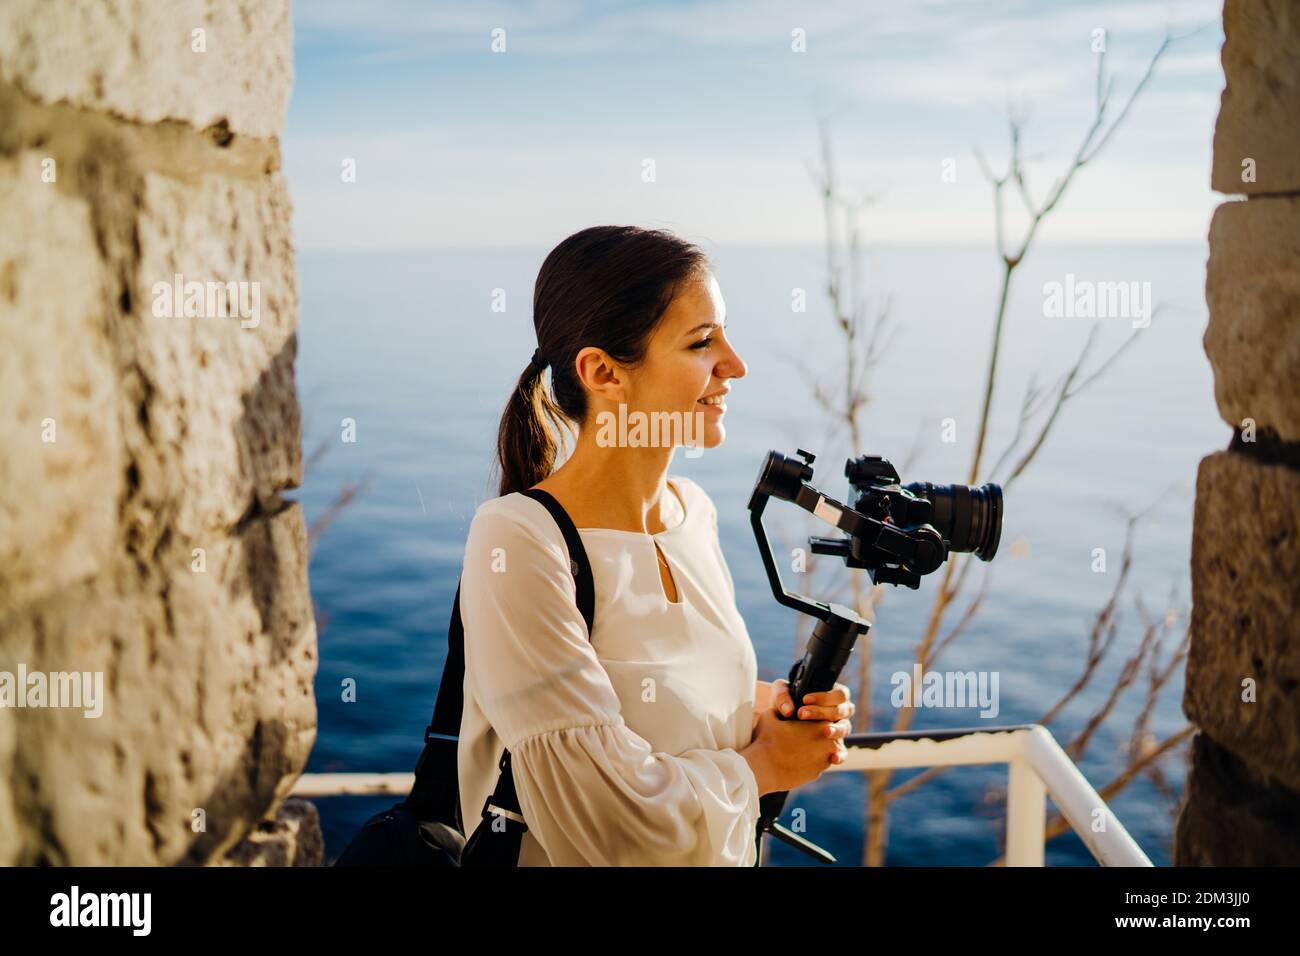 Smiling female travel vlogger video creator filming with a mirrorless camera on a gimbal stabilizer.Freelancer woman recording a low budget film for a Stock Photo